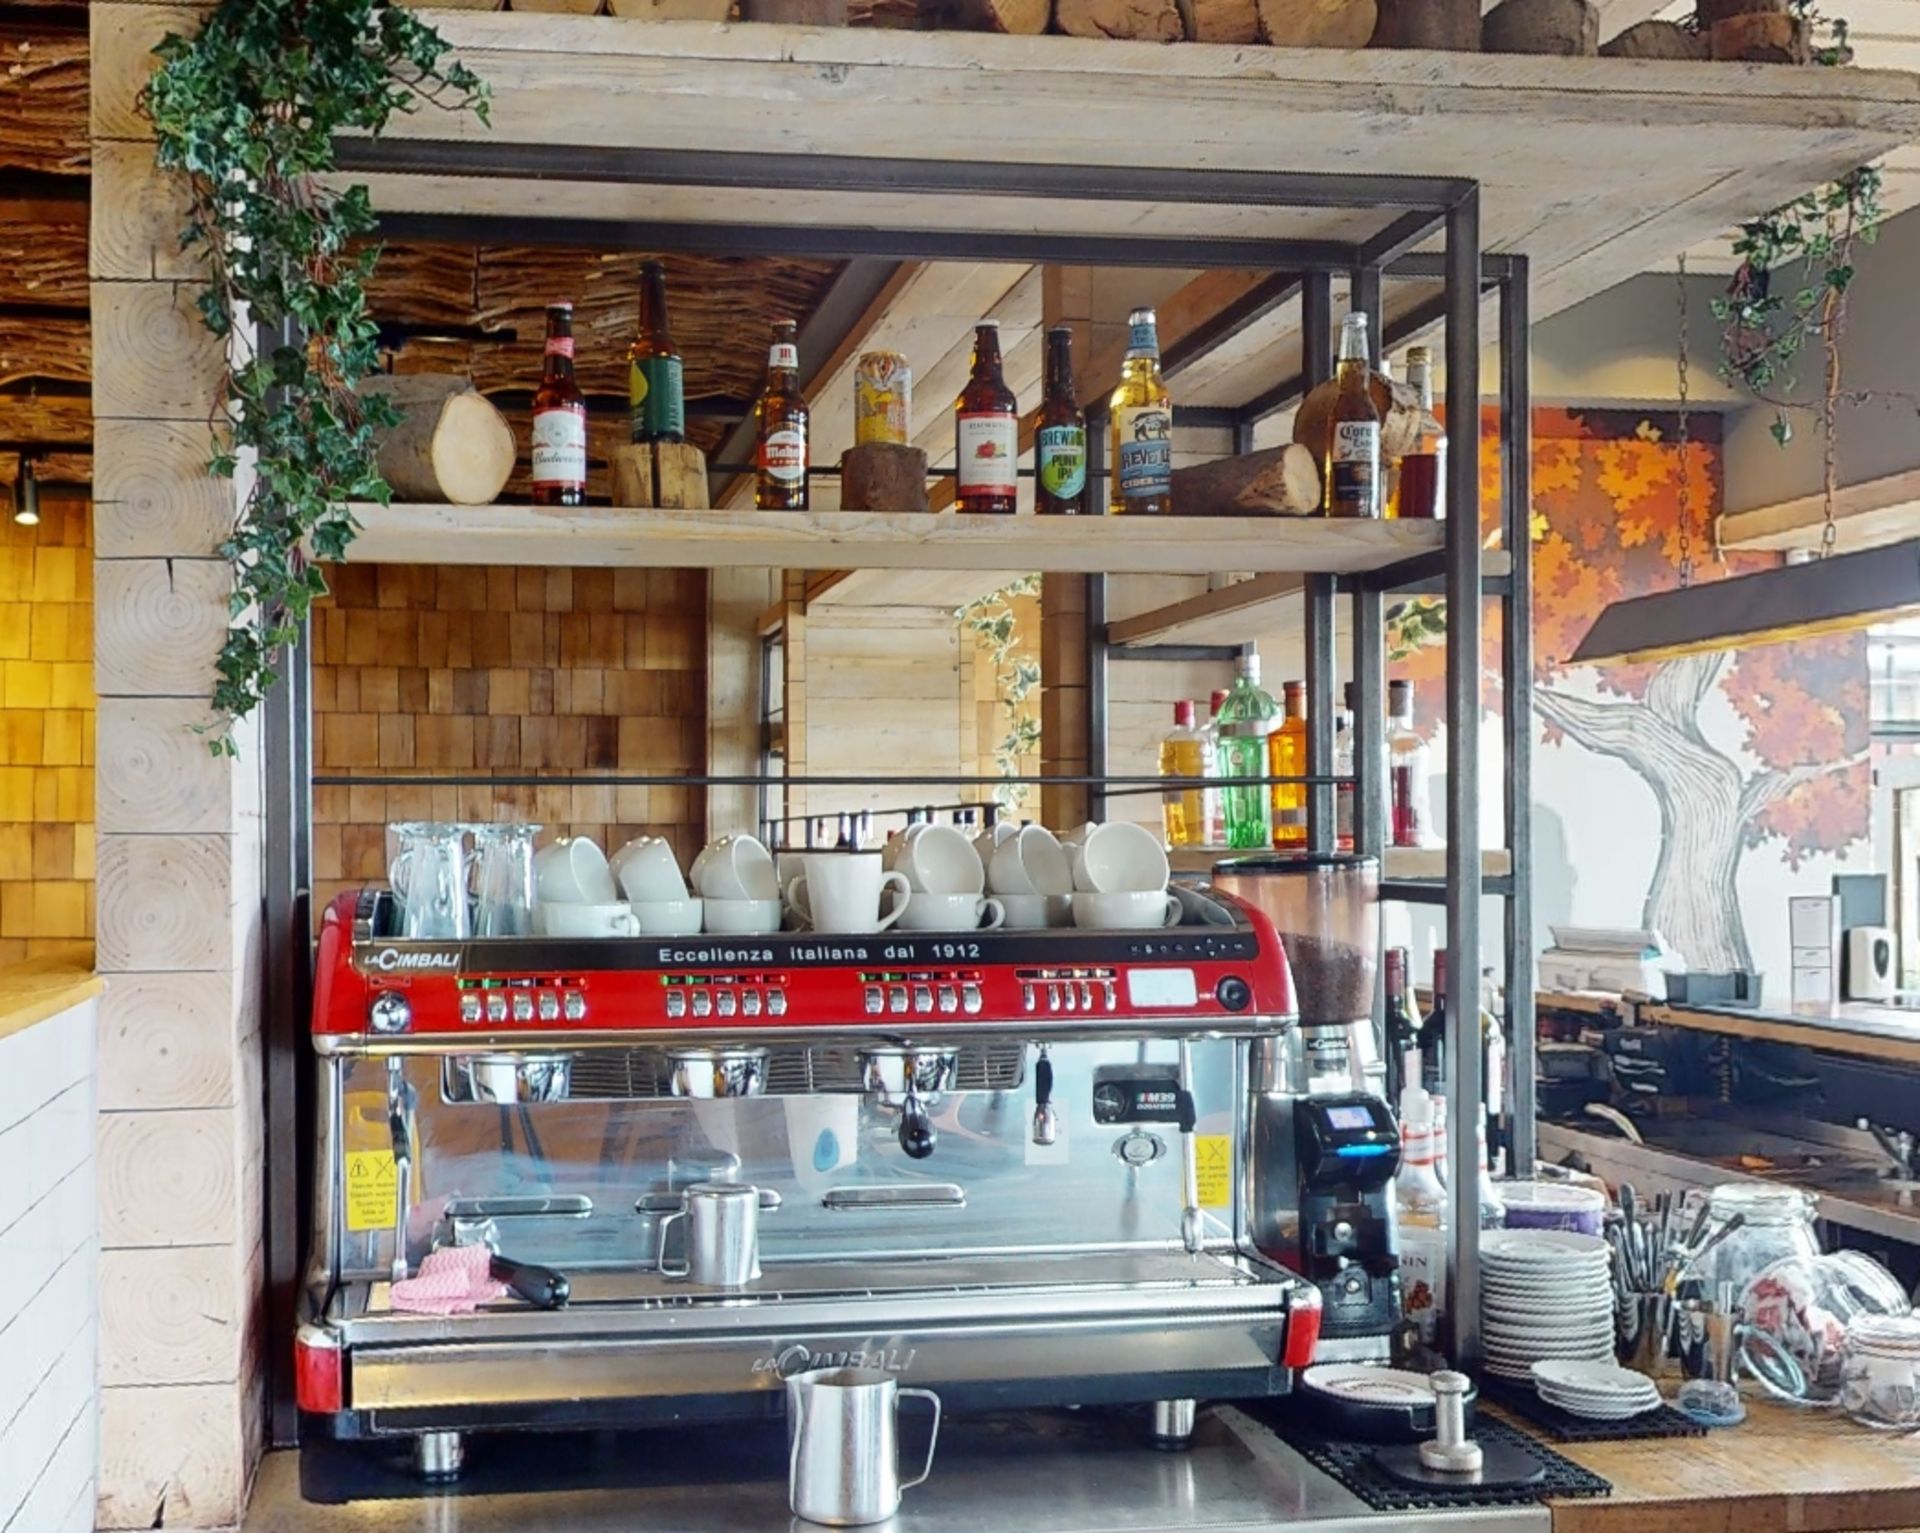 1 x Back Bar Area With an Industrial Steel and Natural Wooden Design - Image 5 of 8